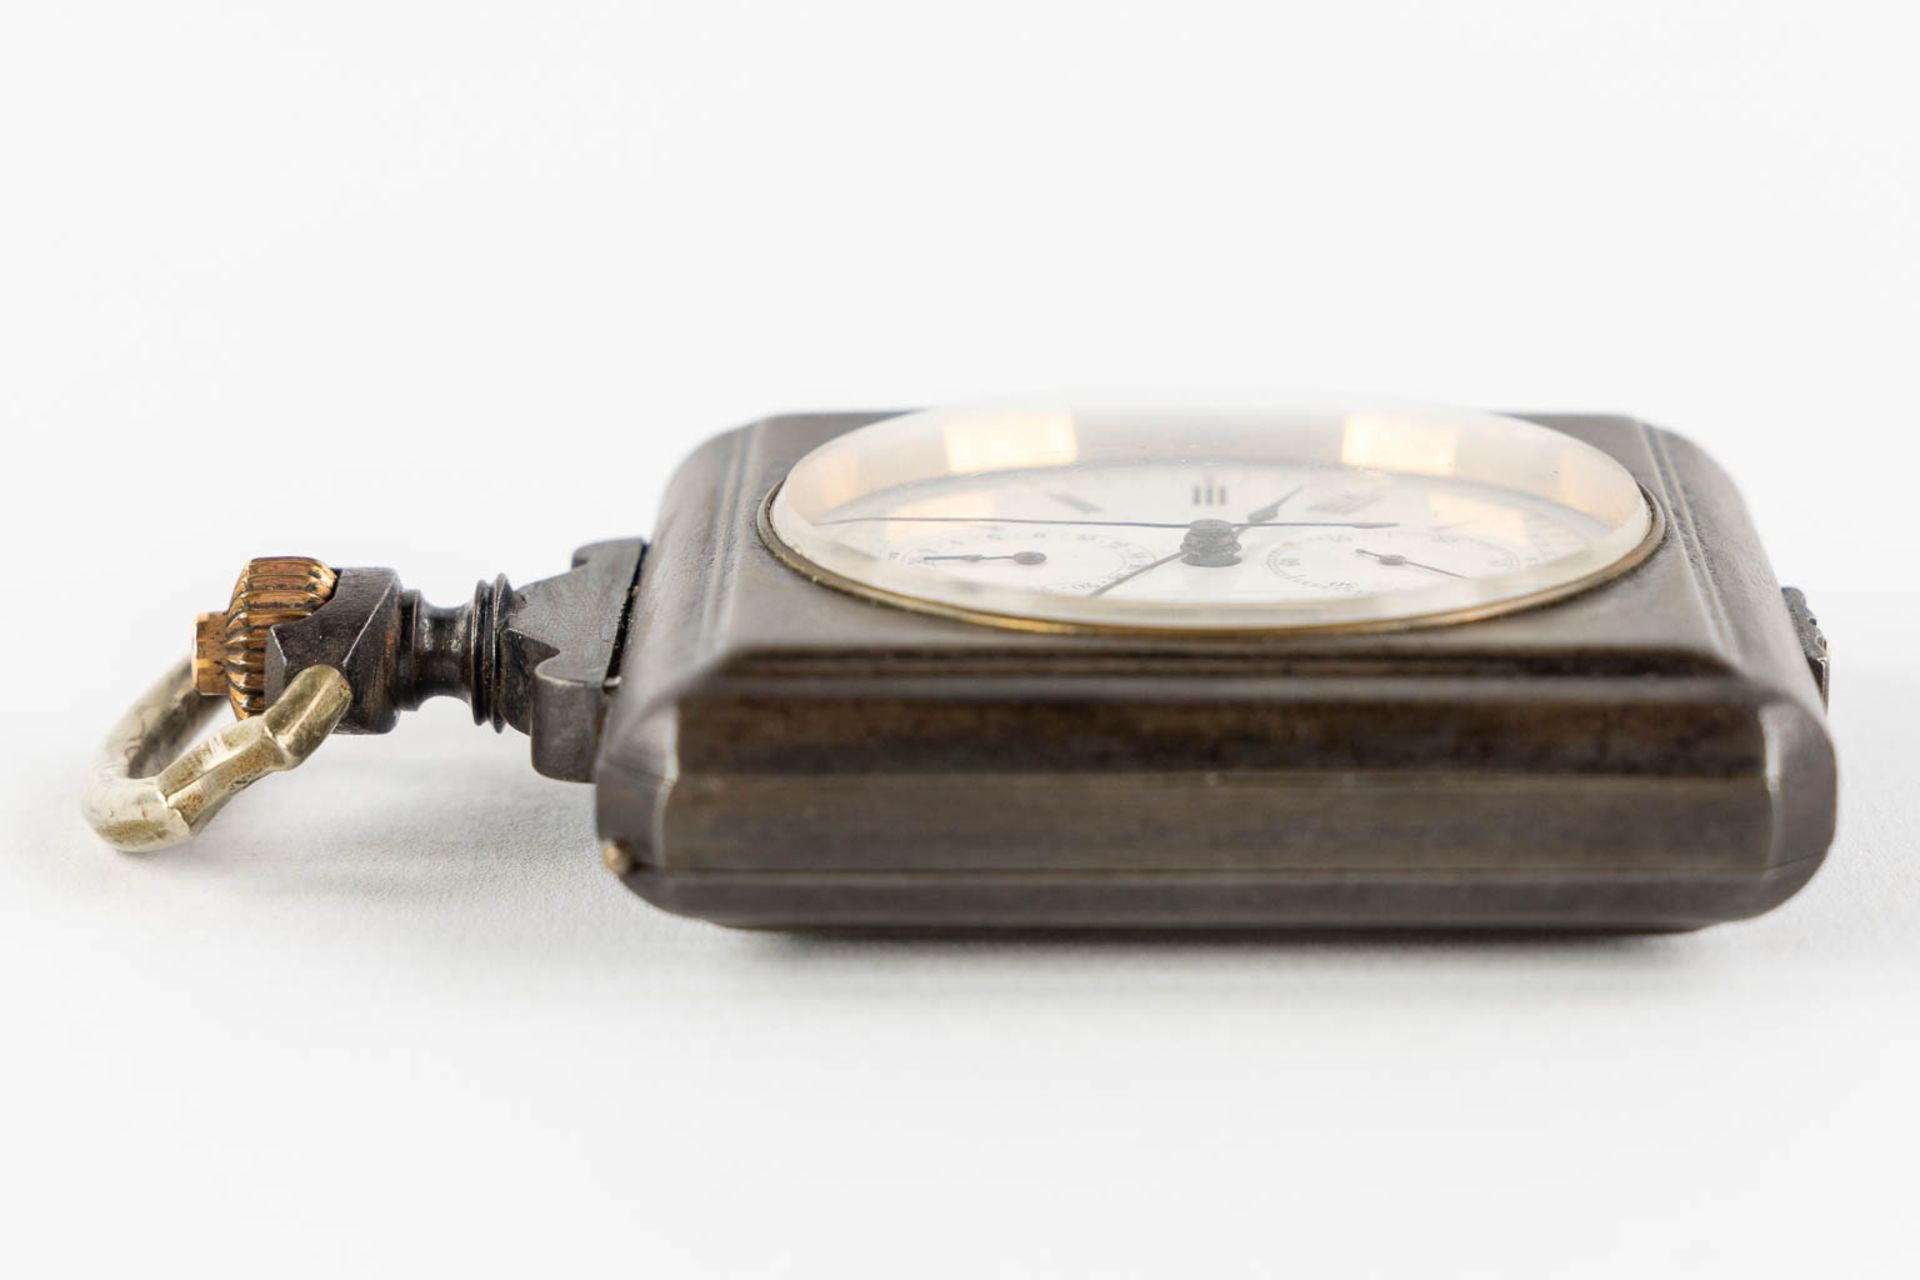 An antique 'Chronograph' pocket watch, first half of the 20th C. (W:6,4 x H:10 cm) - Image 5 of 11